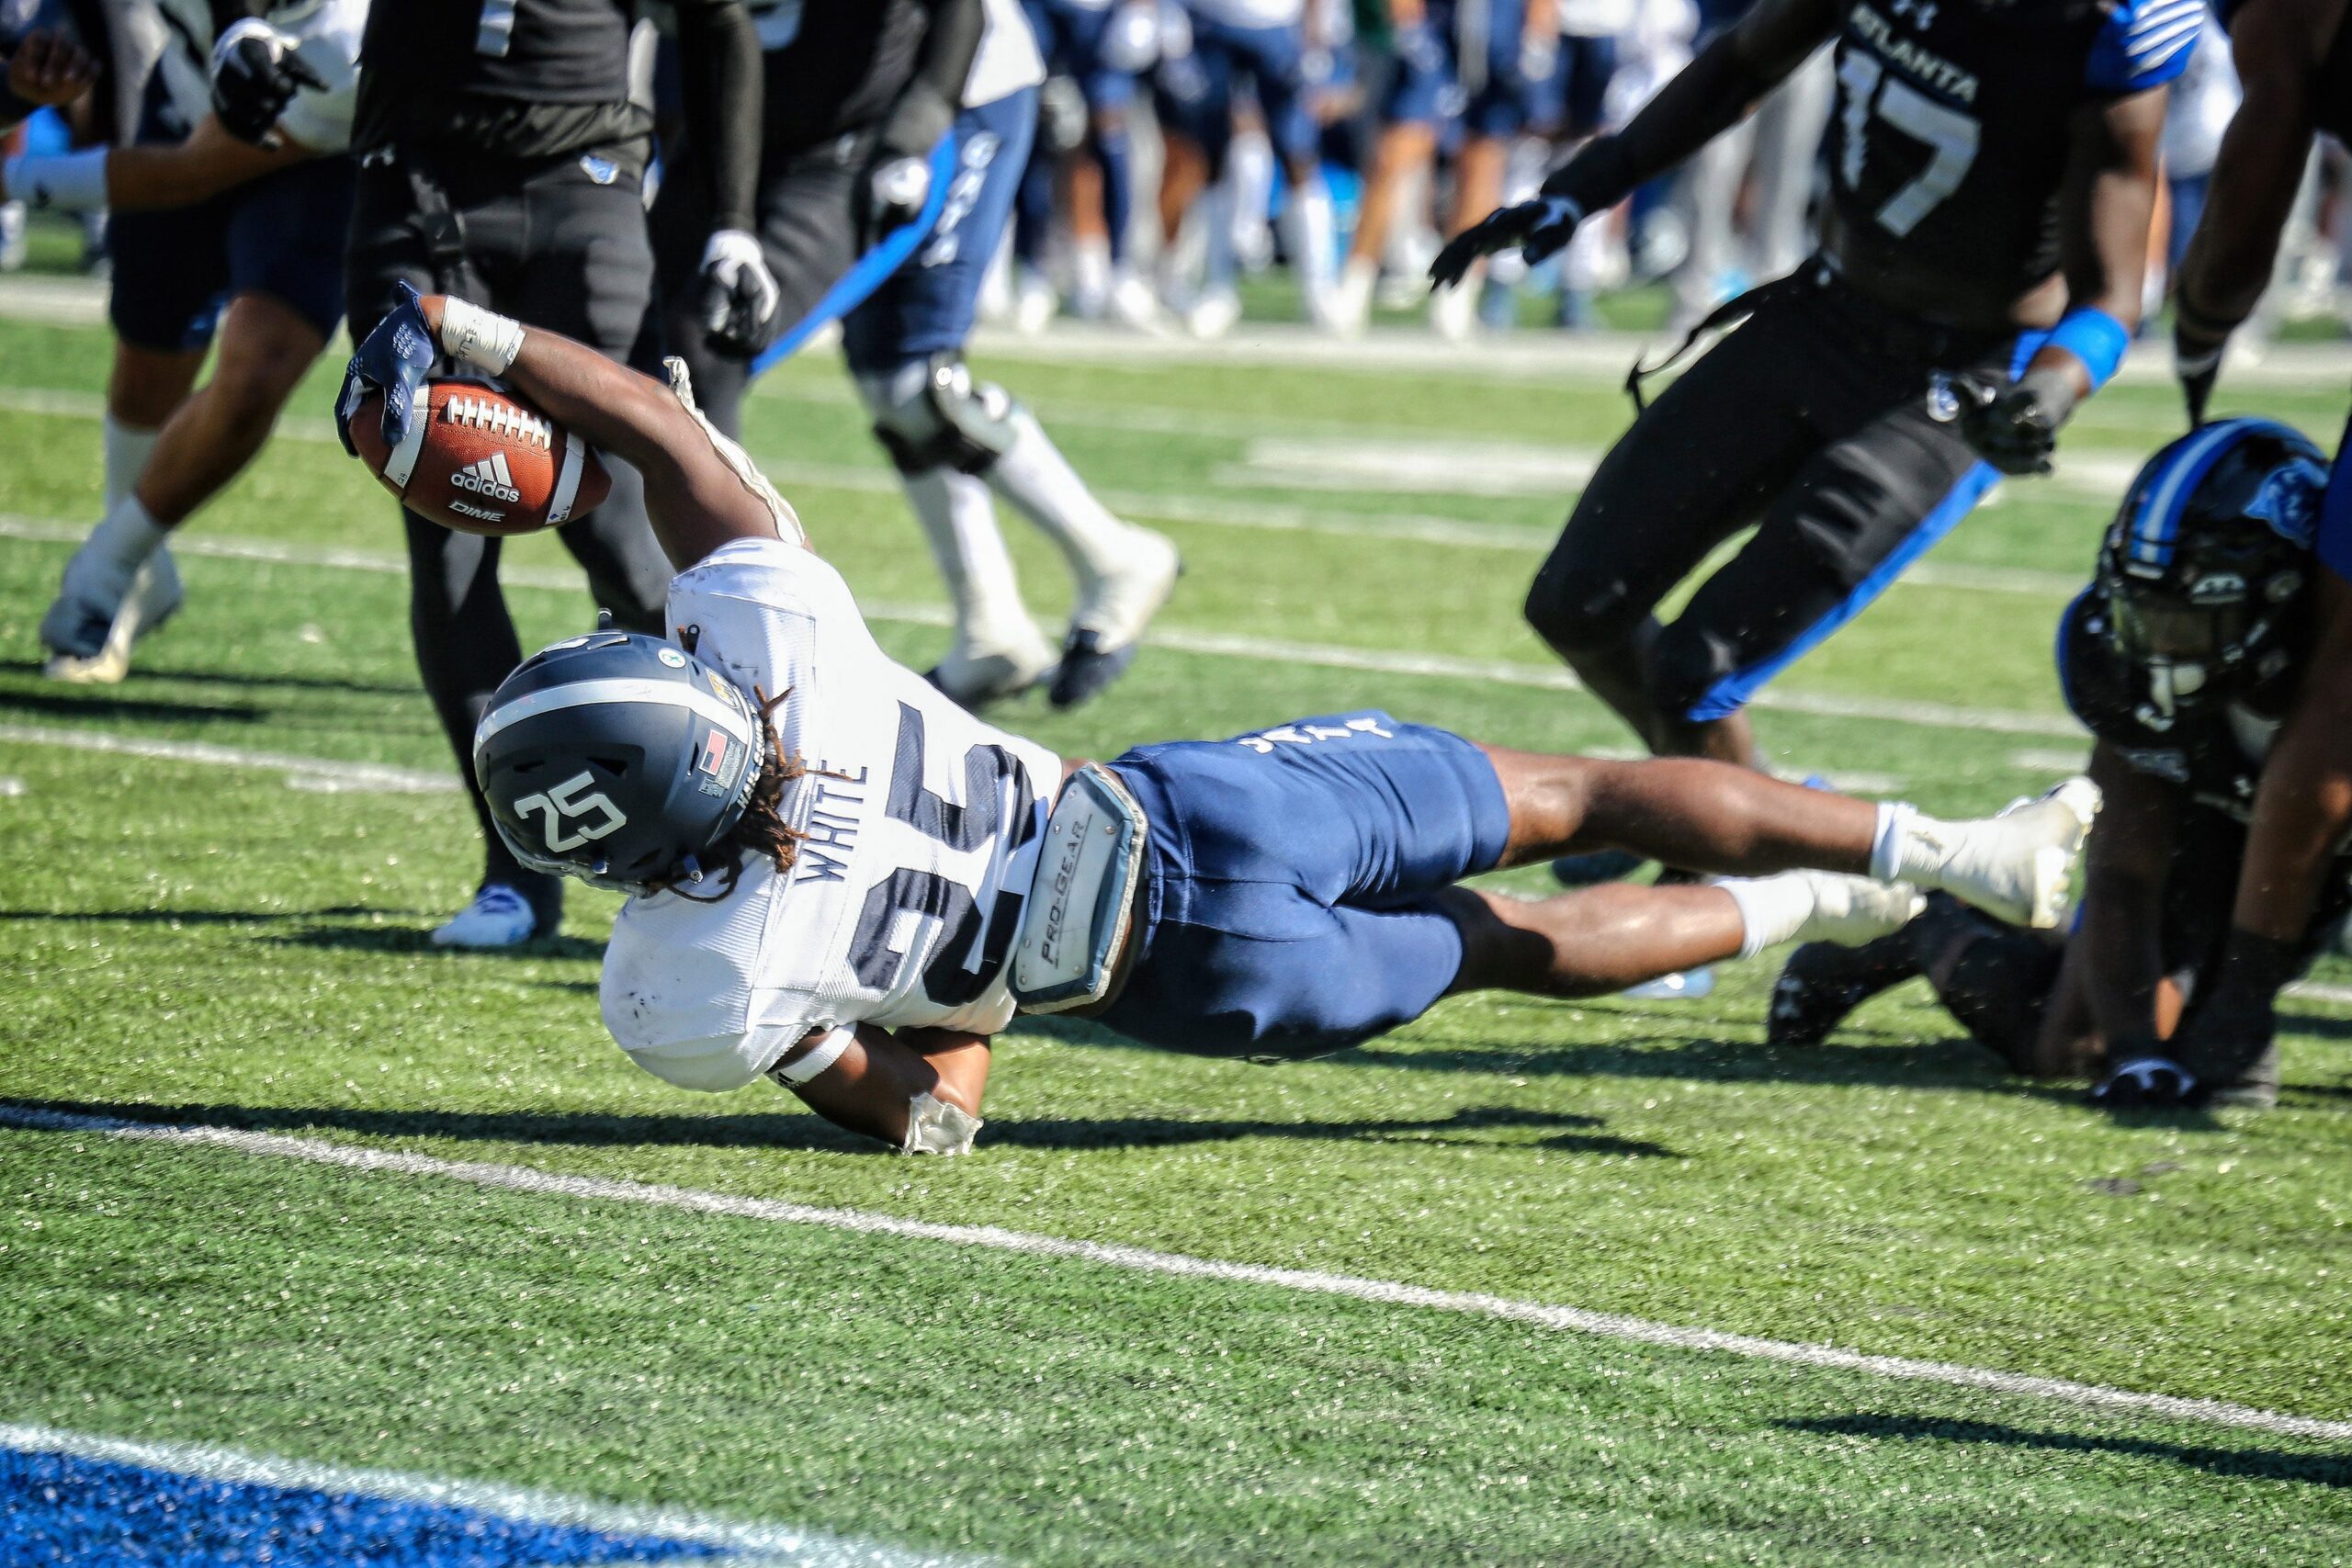 Georgia Southern running back Jalen White stretches for the end zone against Georgia State on Saturday at Center Parc Stadium in Atlanta.